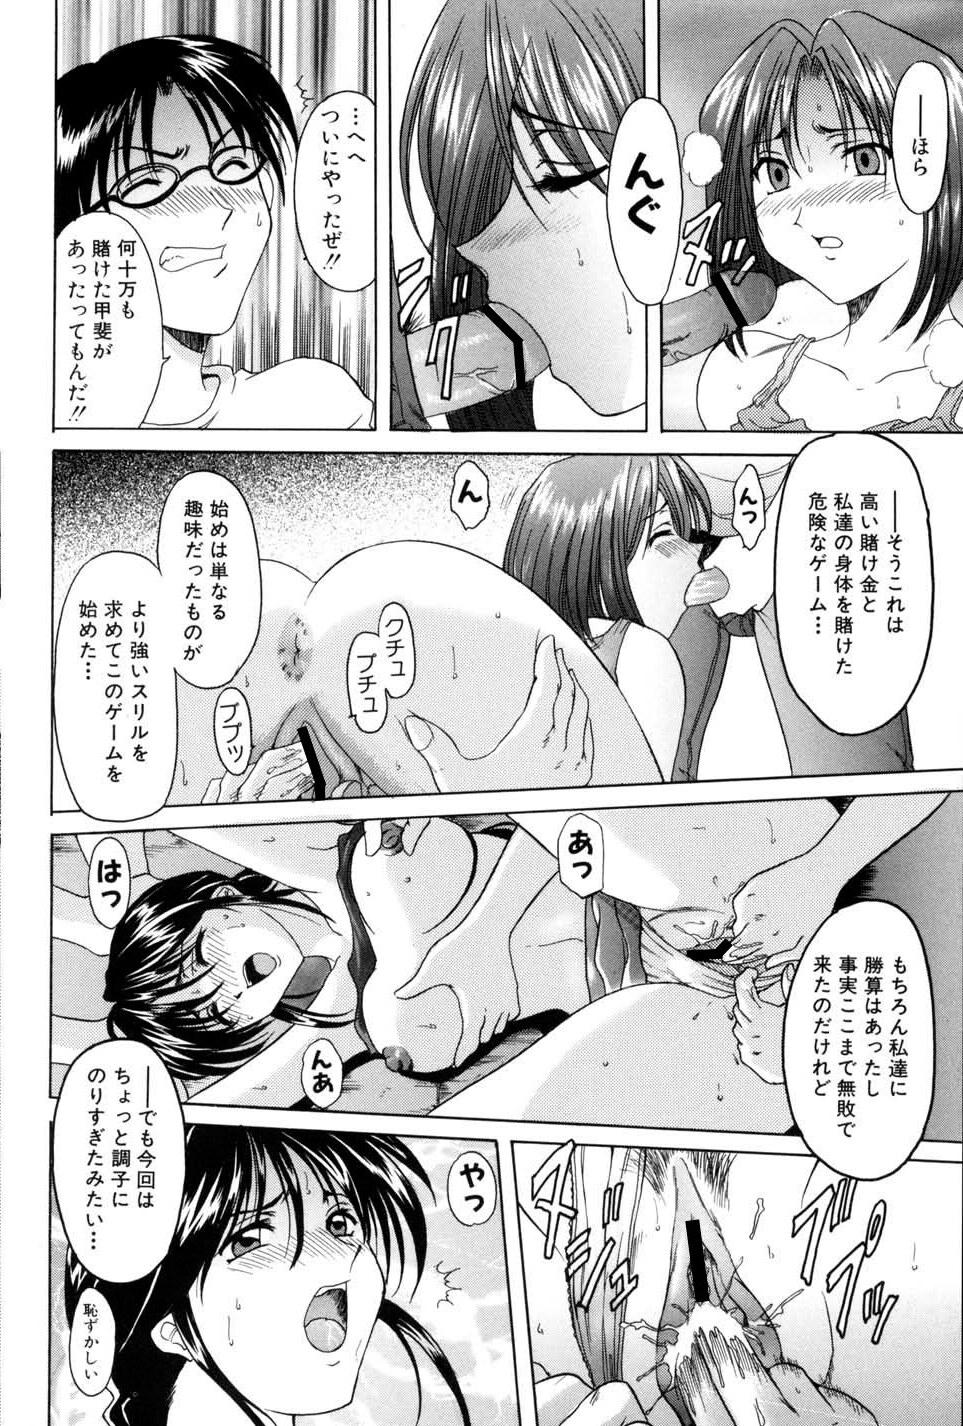 Relax Injyoku no Utage - Youre under arrest | taiho shichauzo Handsome - Page 10